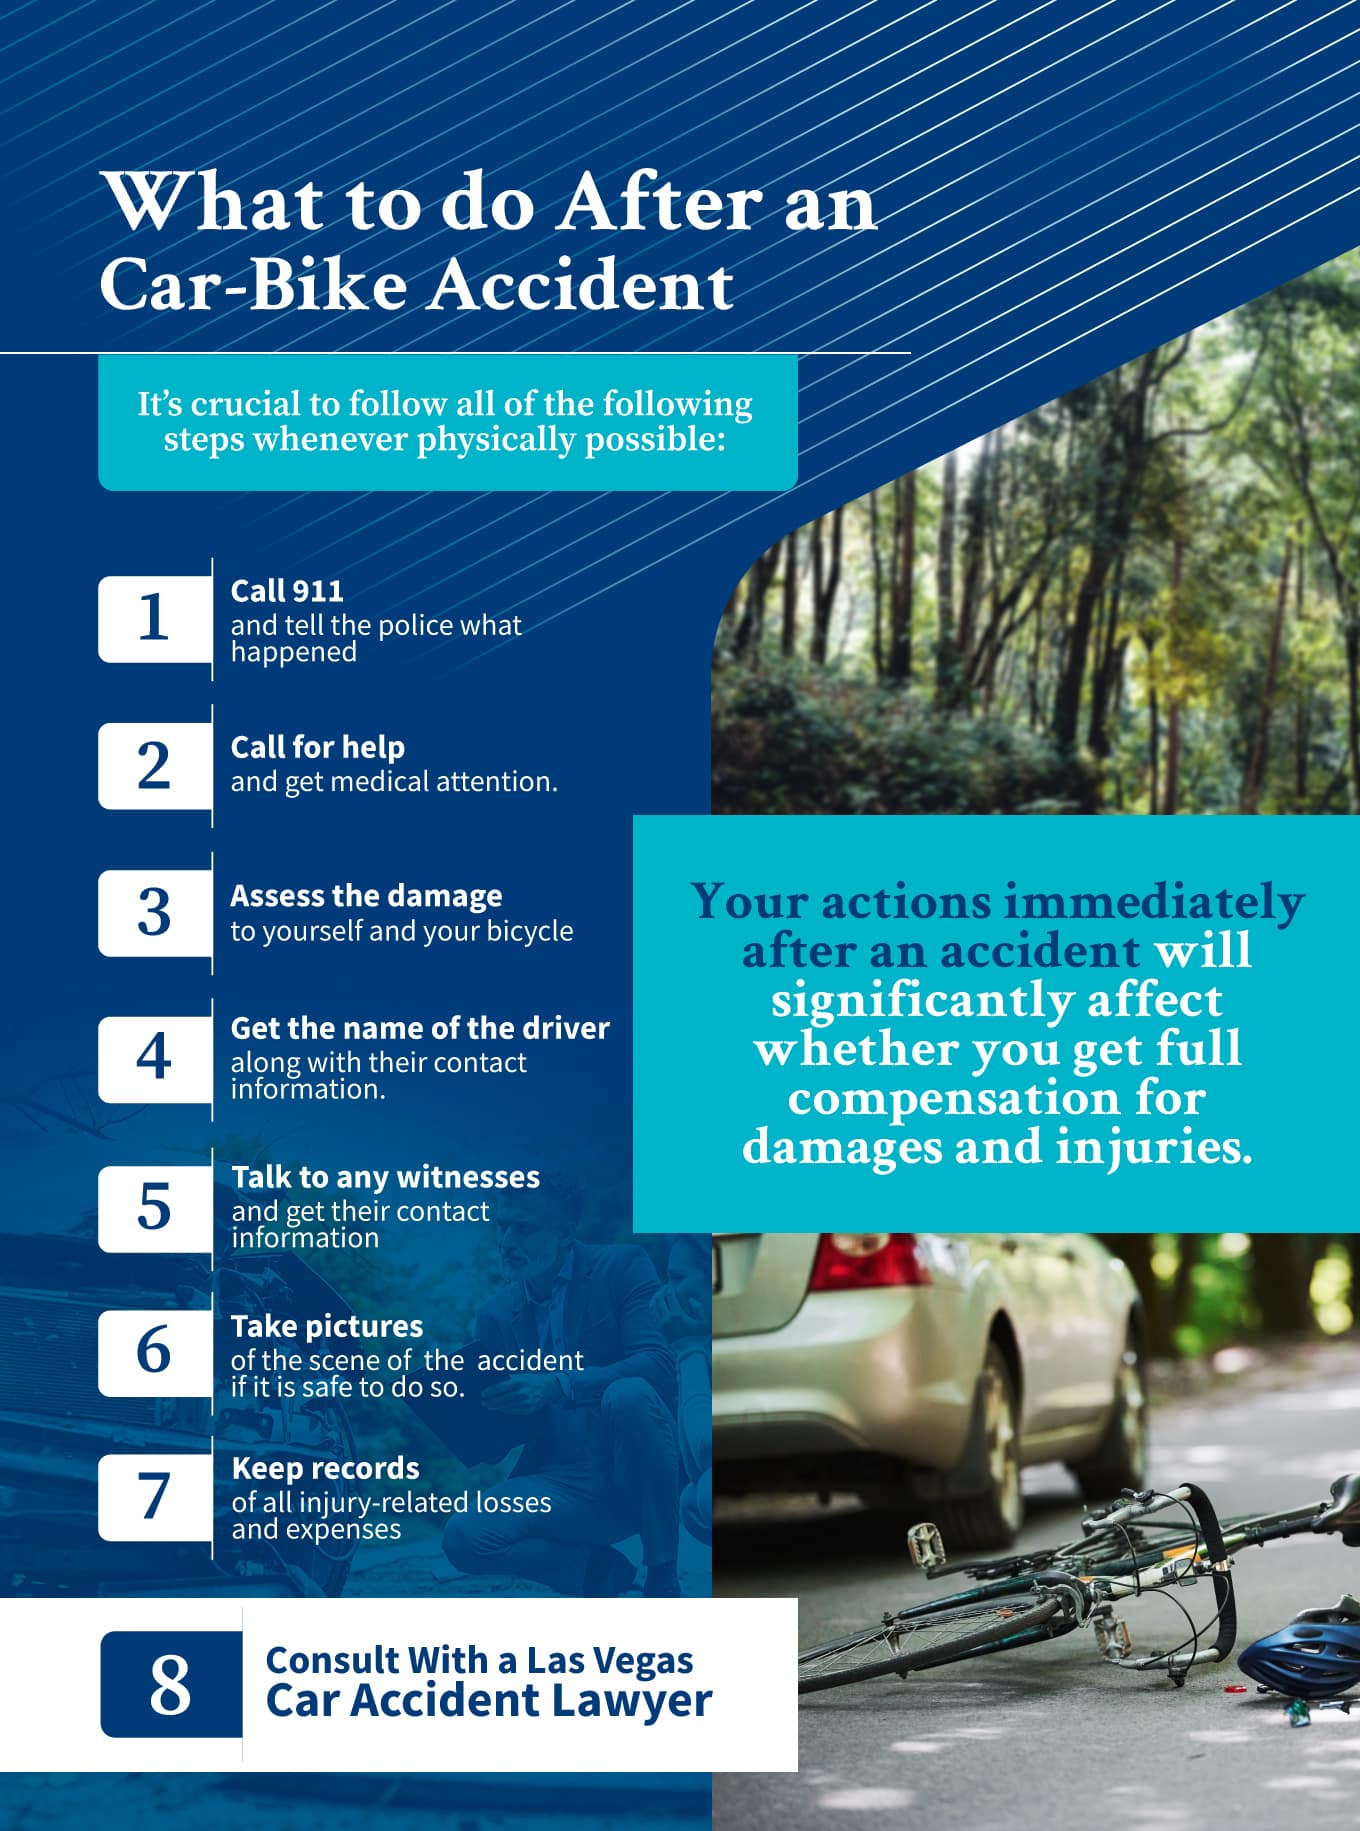 Proving Liability In a Bike-Car Accident: Can a Cyclist Be Sued?